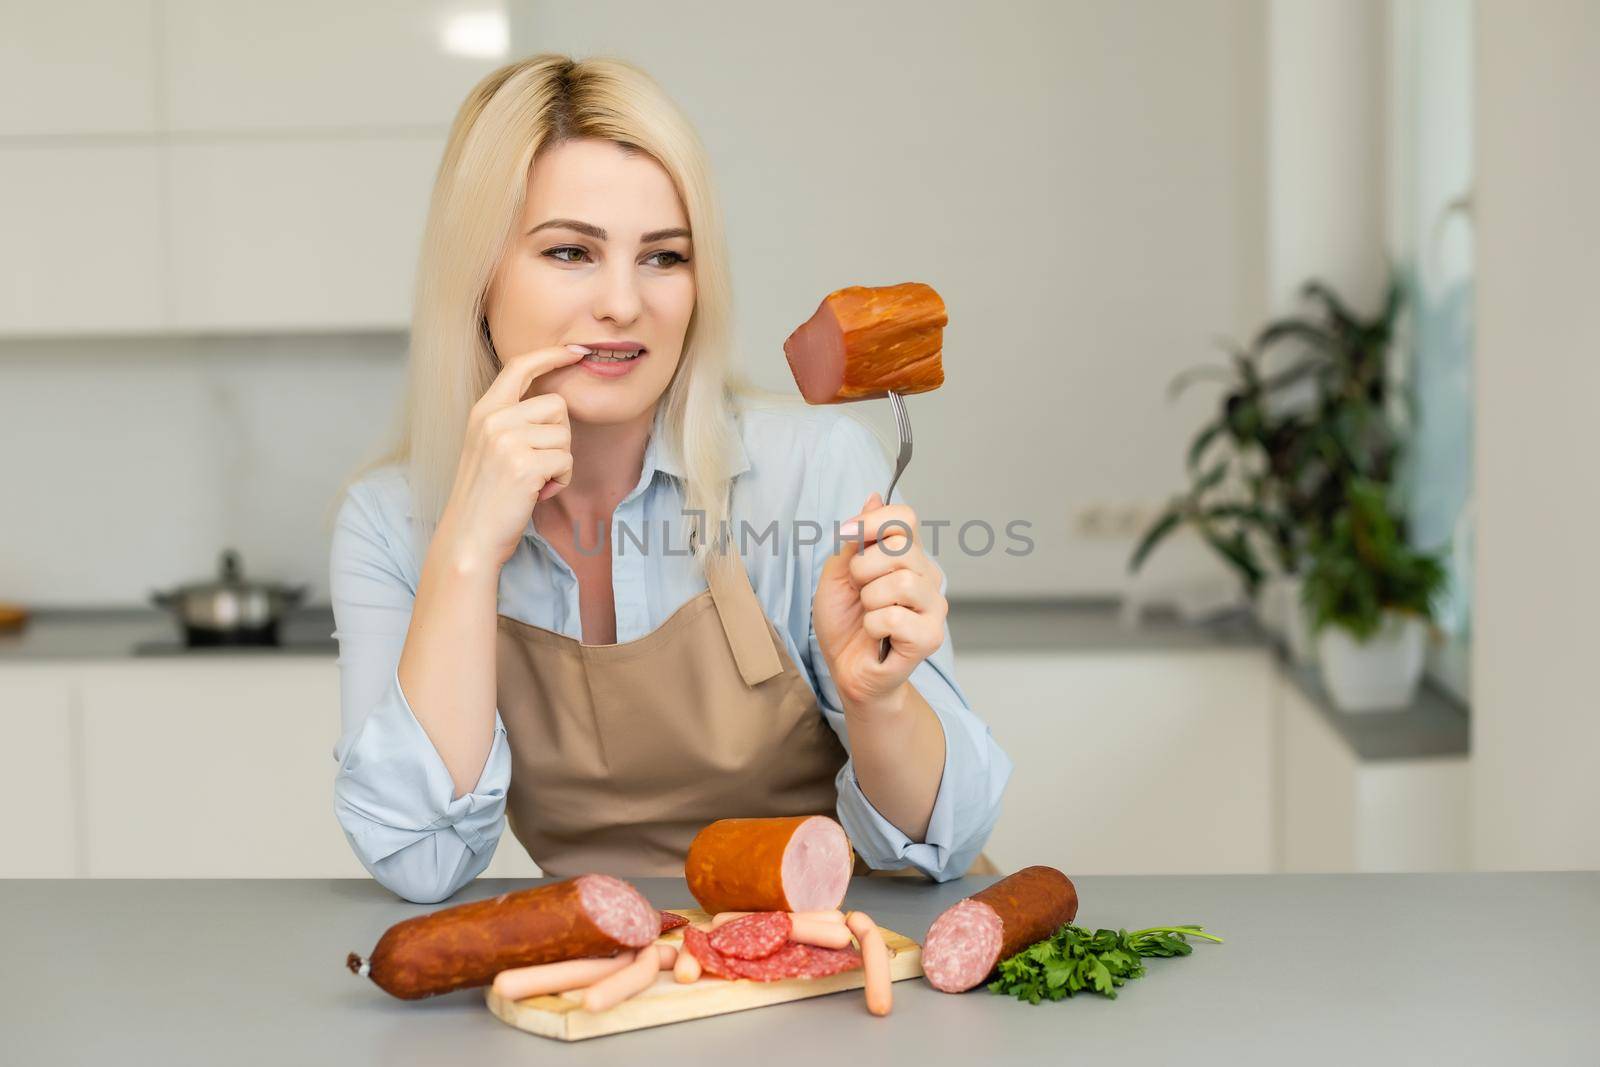 The girl is eating sausage. A piece of sausage. Smile and Joy. Business concept is the brand's appeal. Appetite